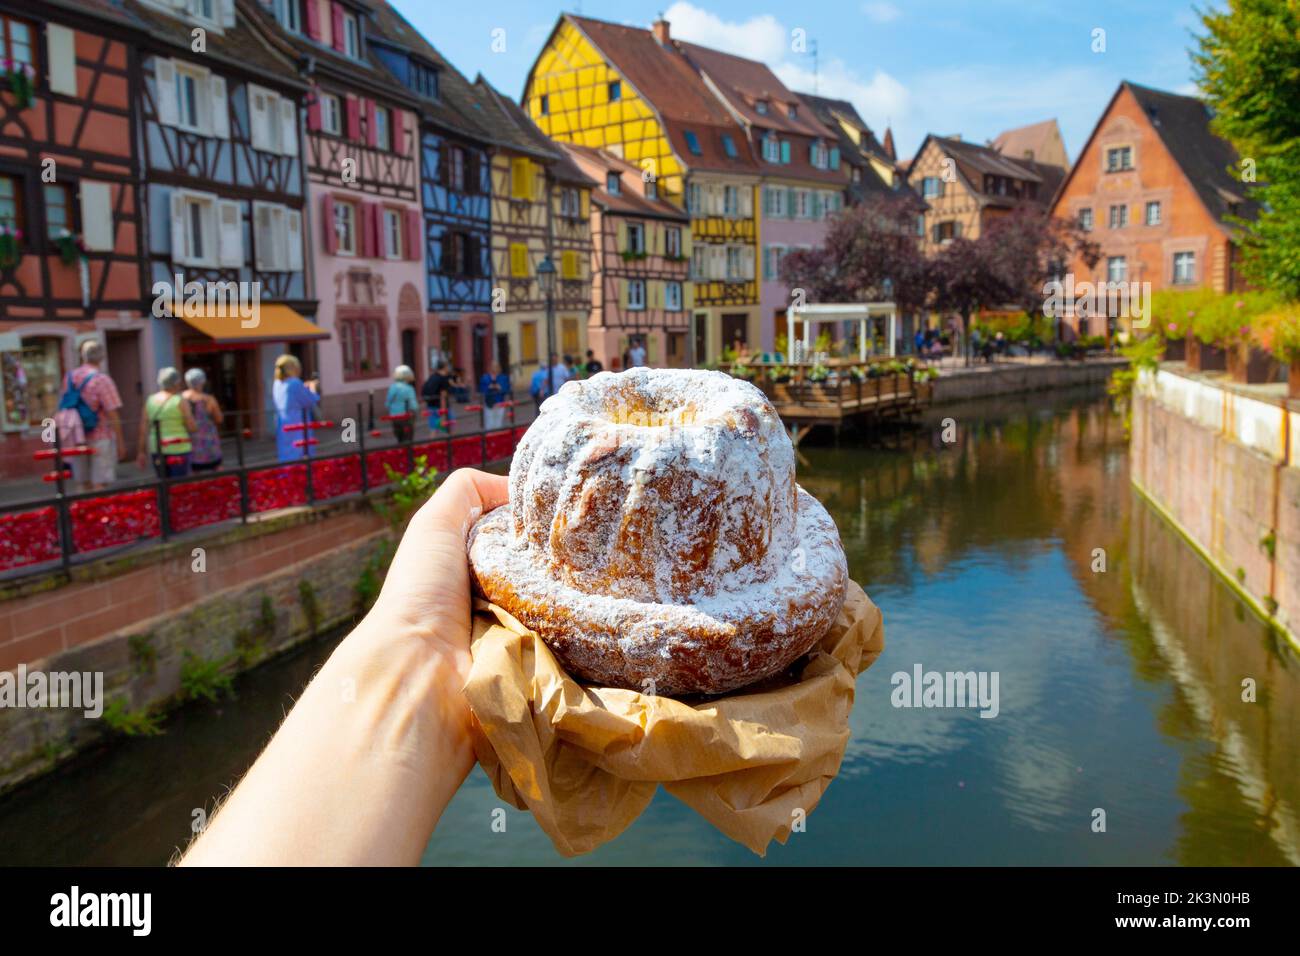 Kougelhopf cake from Marché couvert with Little Venice in the background, Colmar, France Stock Photo